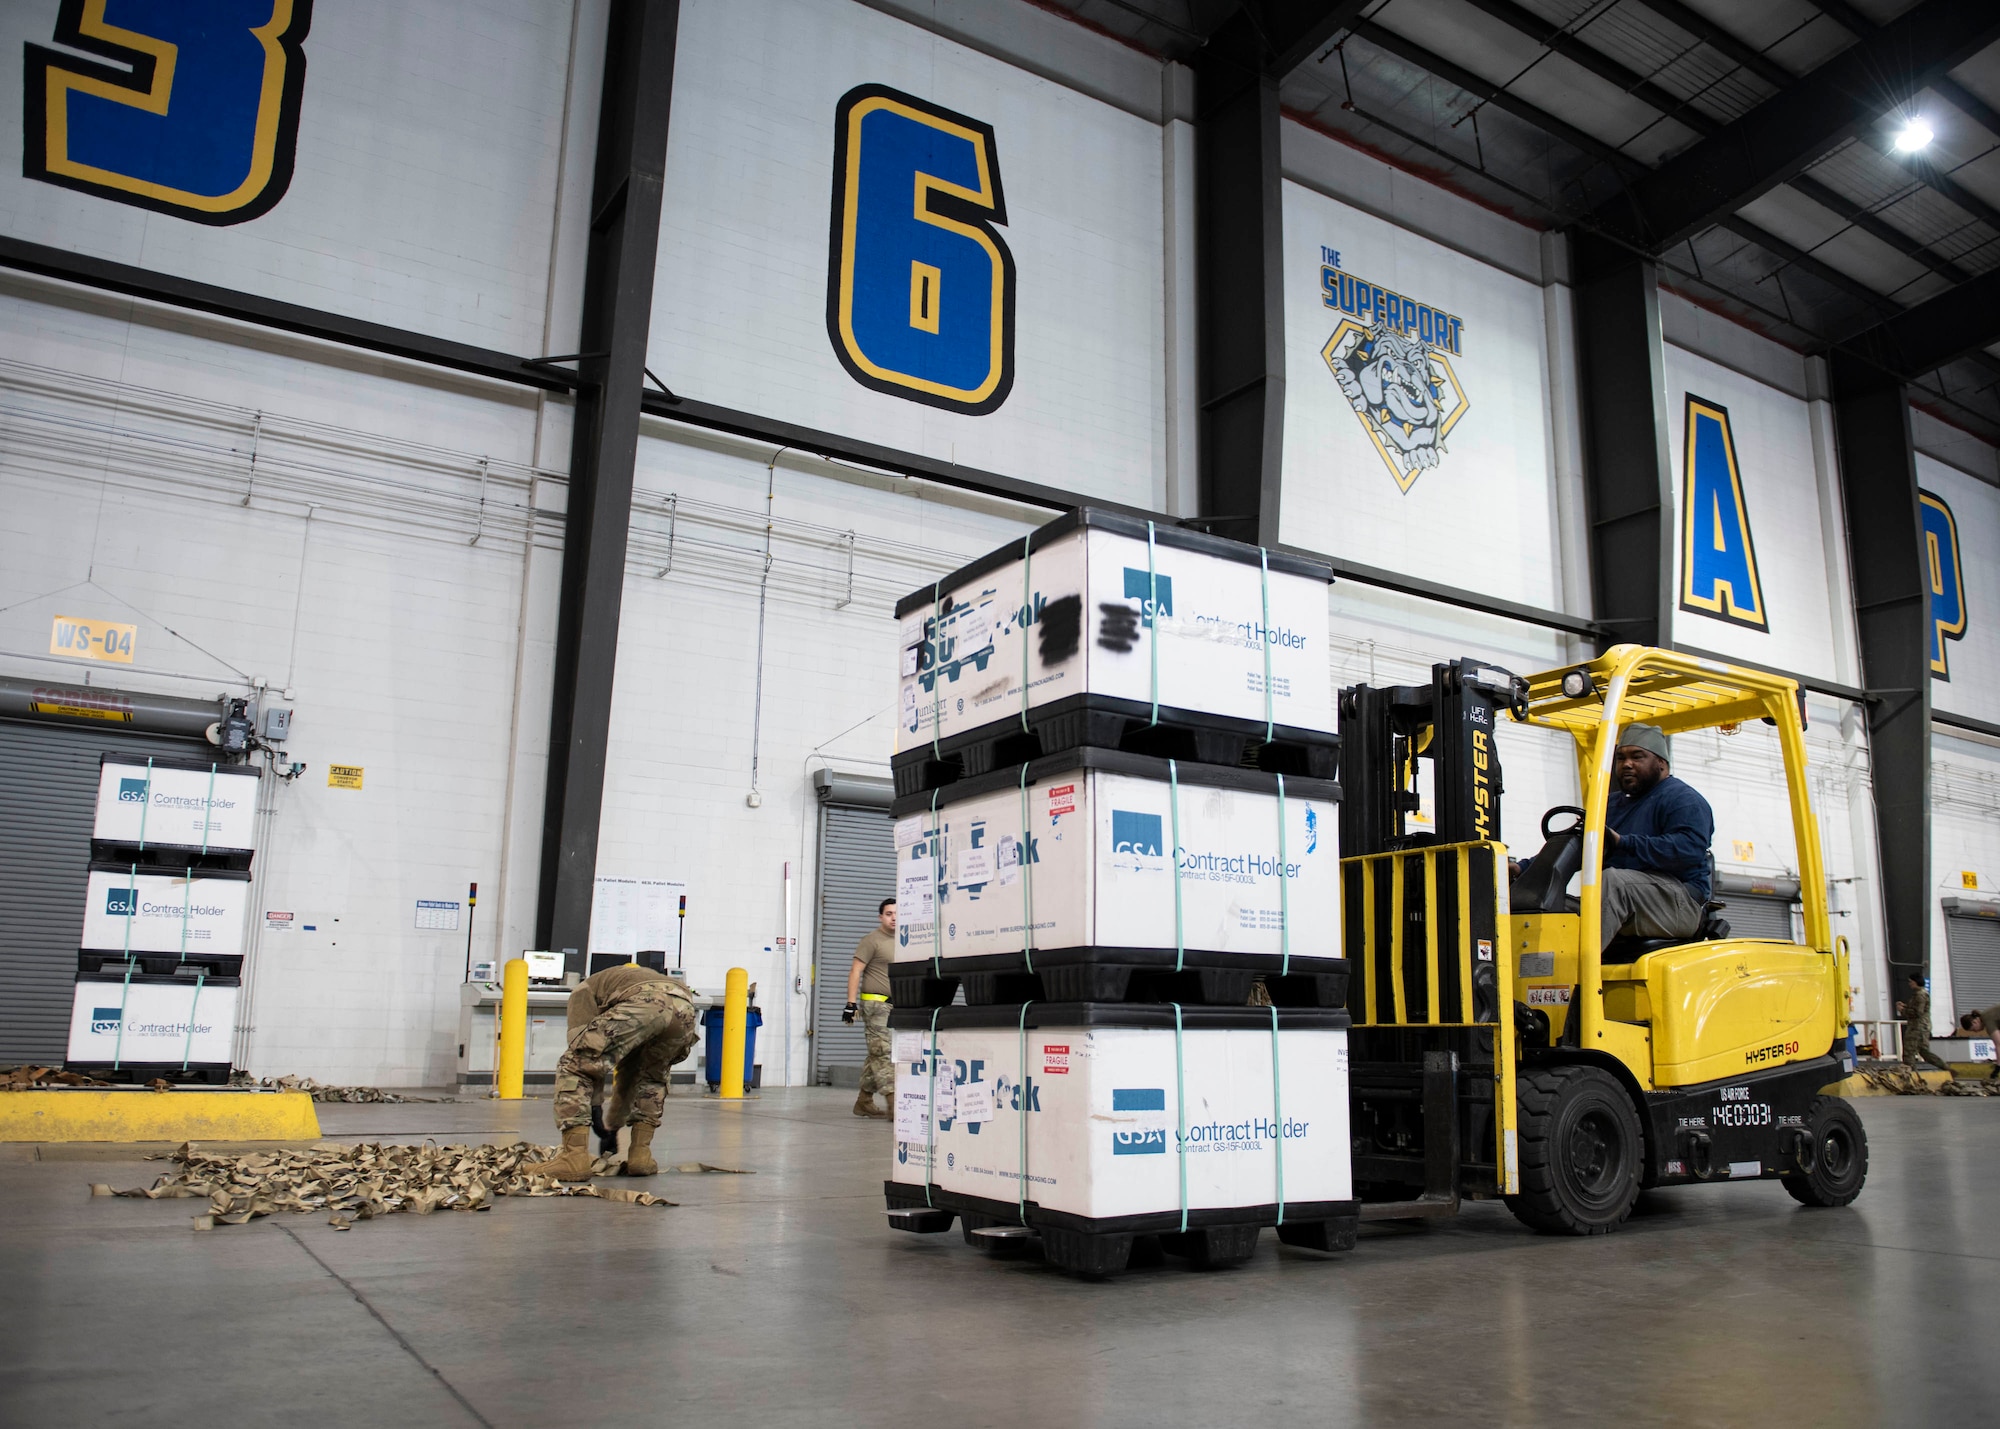 Charles Knight, 436th Aerial Port Squadron materials handler, uses a forklift to move packages of body armor and helmets bound for Ukraine during a foreign mili-tary sales mission at Dover Air Force Base, Delaware, March 8, 2022. Since 2014, the United States has committed more than $5.4 billion in total assistance to Ukraine, including security and non-security assistance. The Unit-ed States reaffirms its steadfast commitment to Ukraine’s sover-eignty and territorial integrity in support of a secure and prosper-ous Ukraine. (U.S. Air Force pho-to by Tech. Sgt. J.D. Strong II)